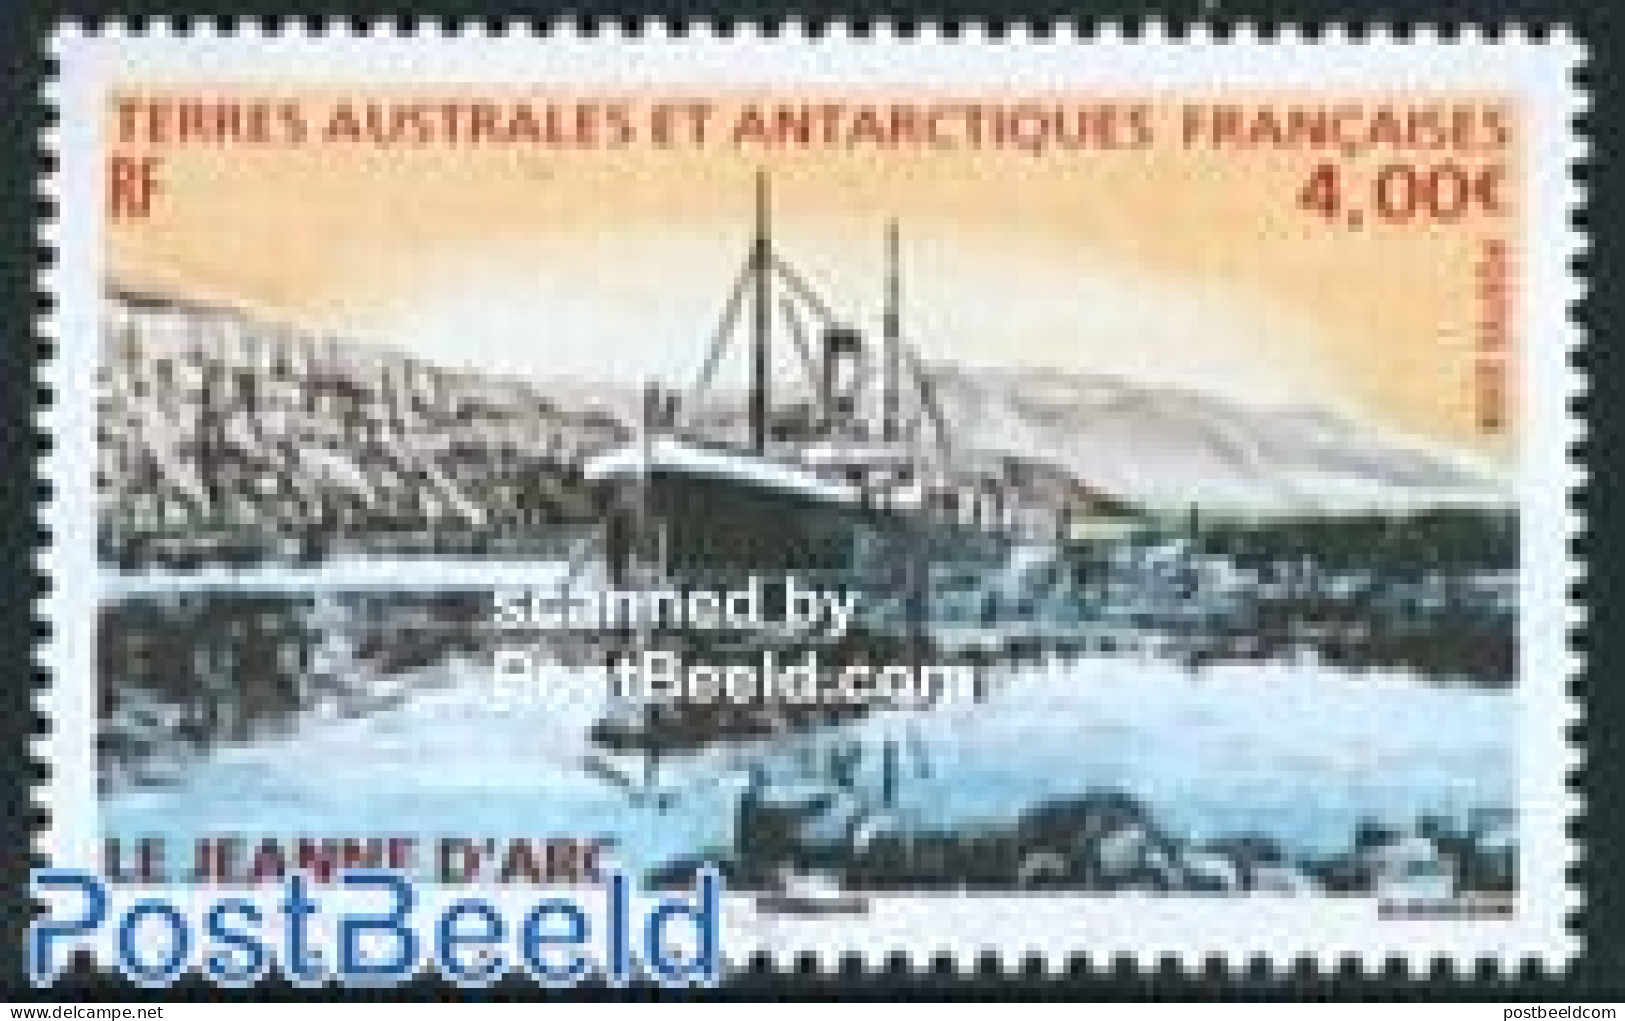 French Antarctic Territory 2009 Ship, Le Jeanne DArc 1v, Mint NH, Transport - Ships And Boats - Ungebraucht